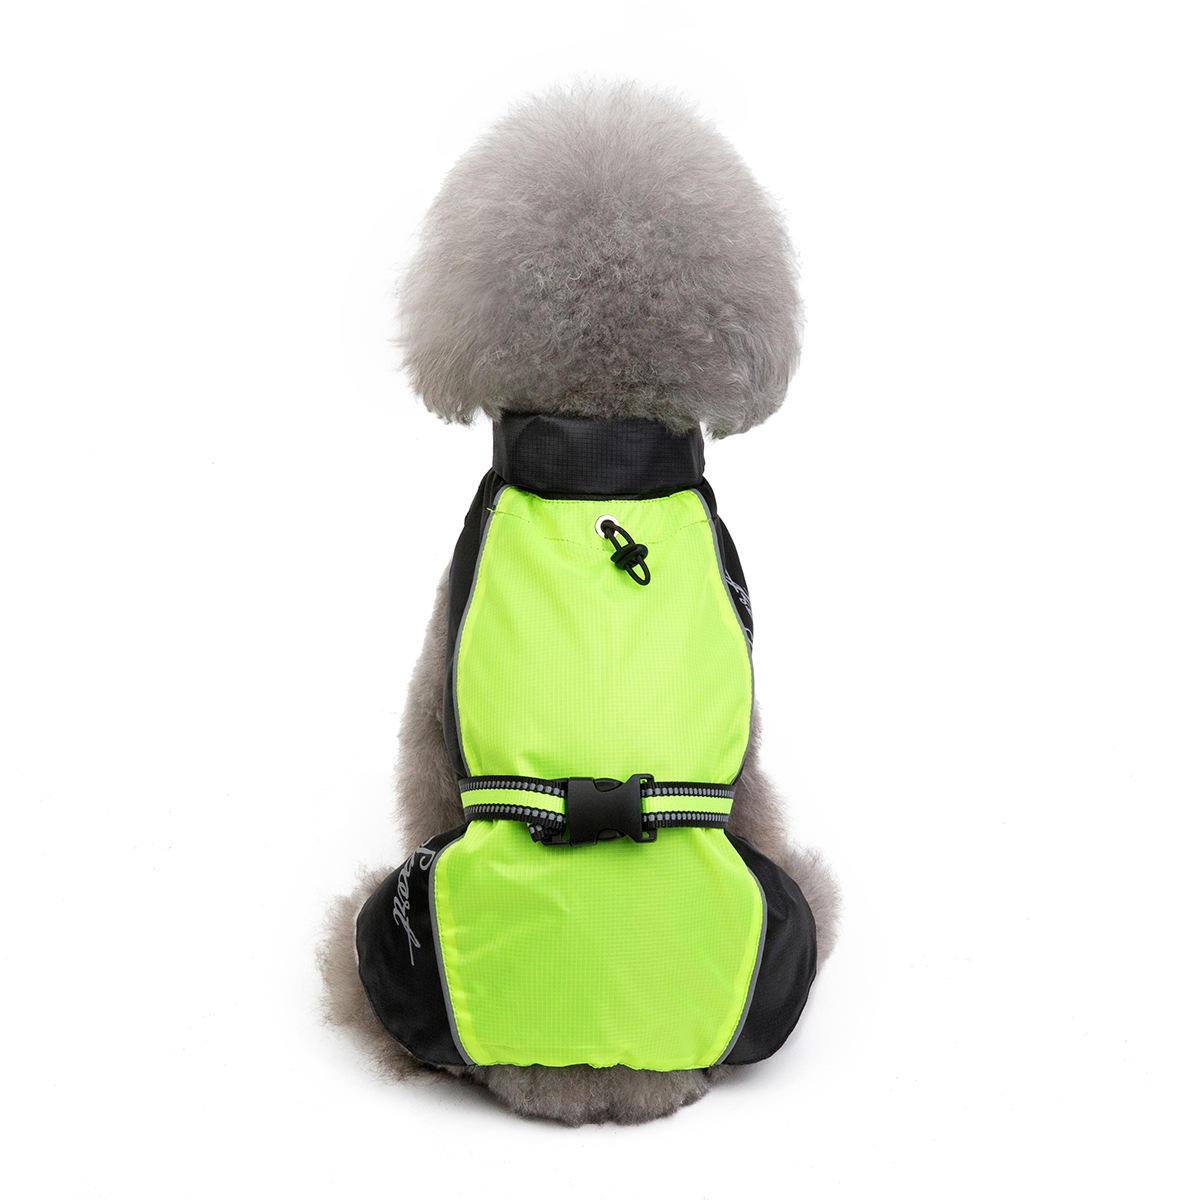 Wholesale Outdoor Pet Large Dog Raincoat Clothes Charge Coat For All Season